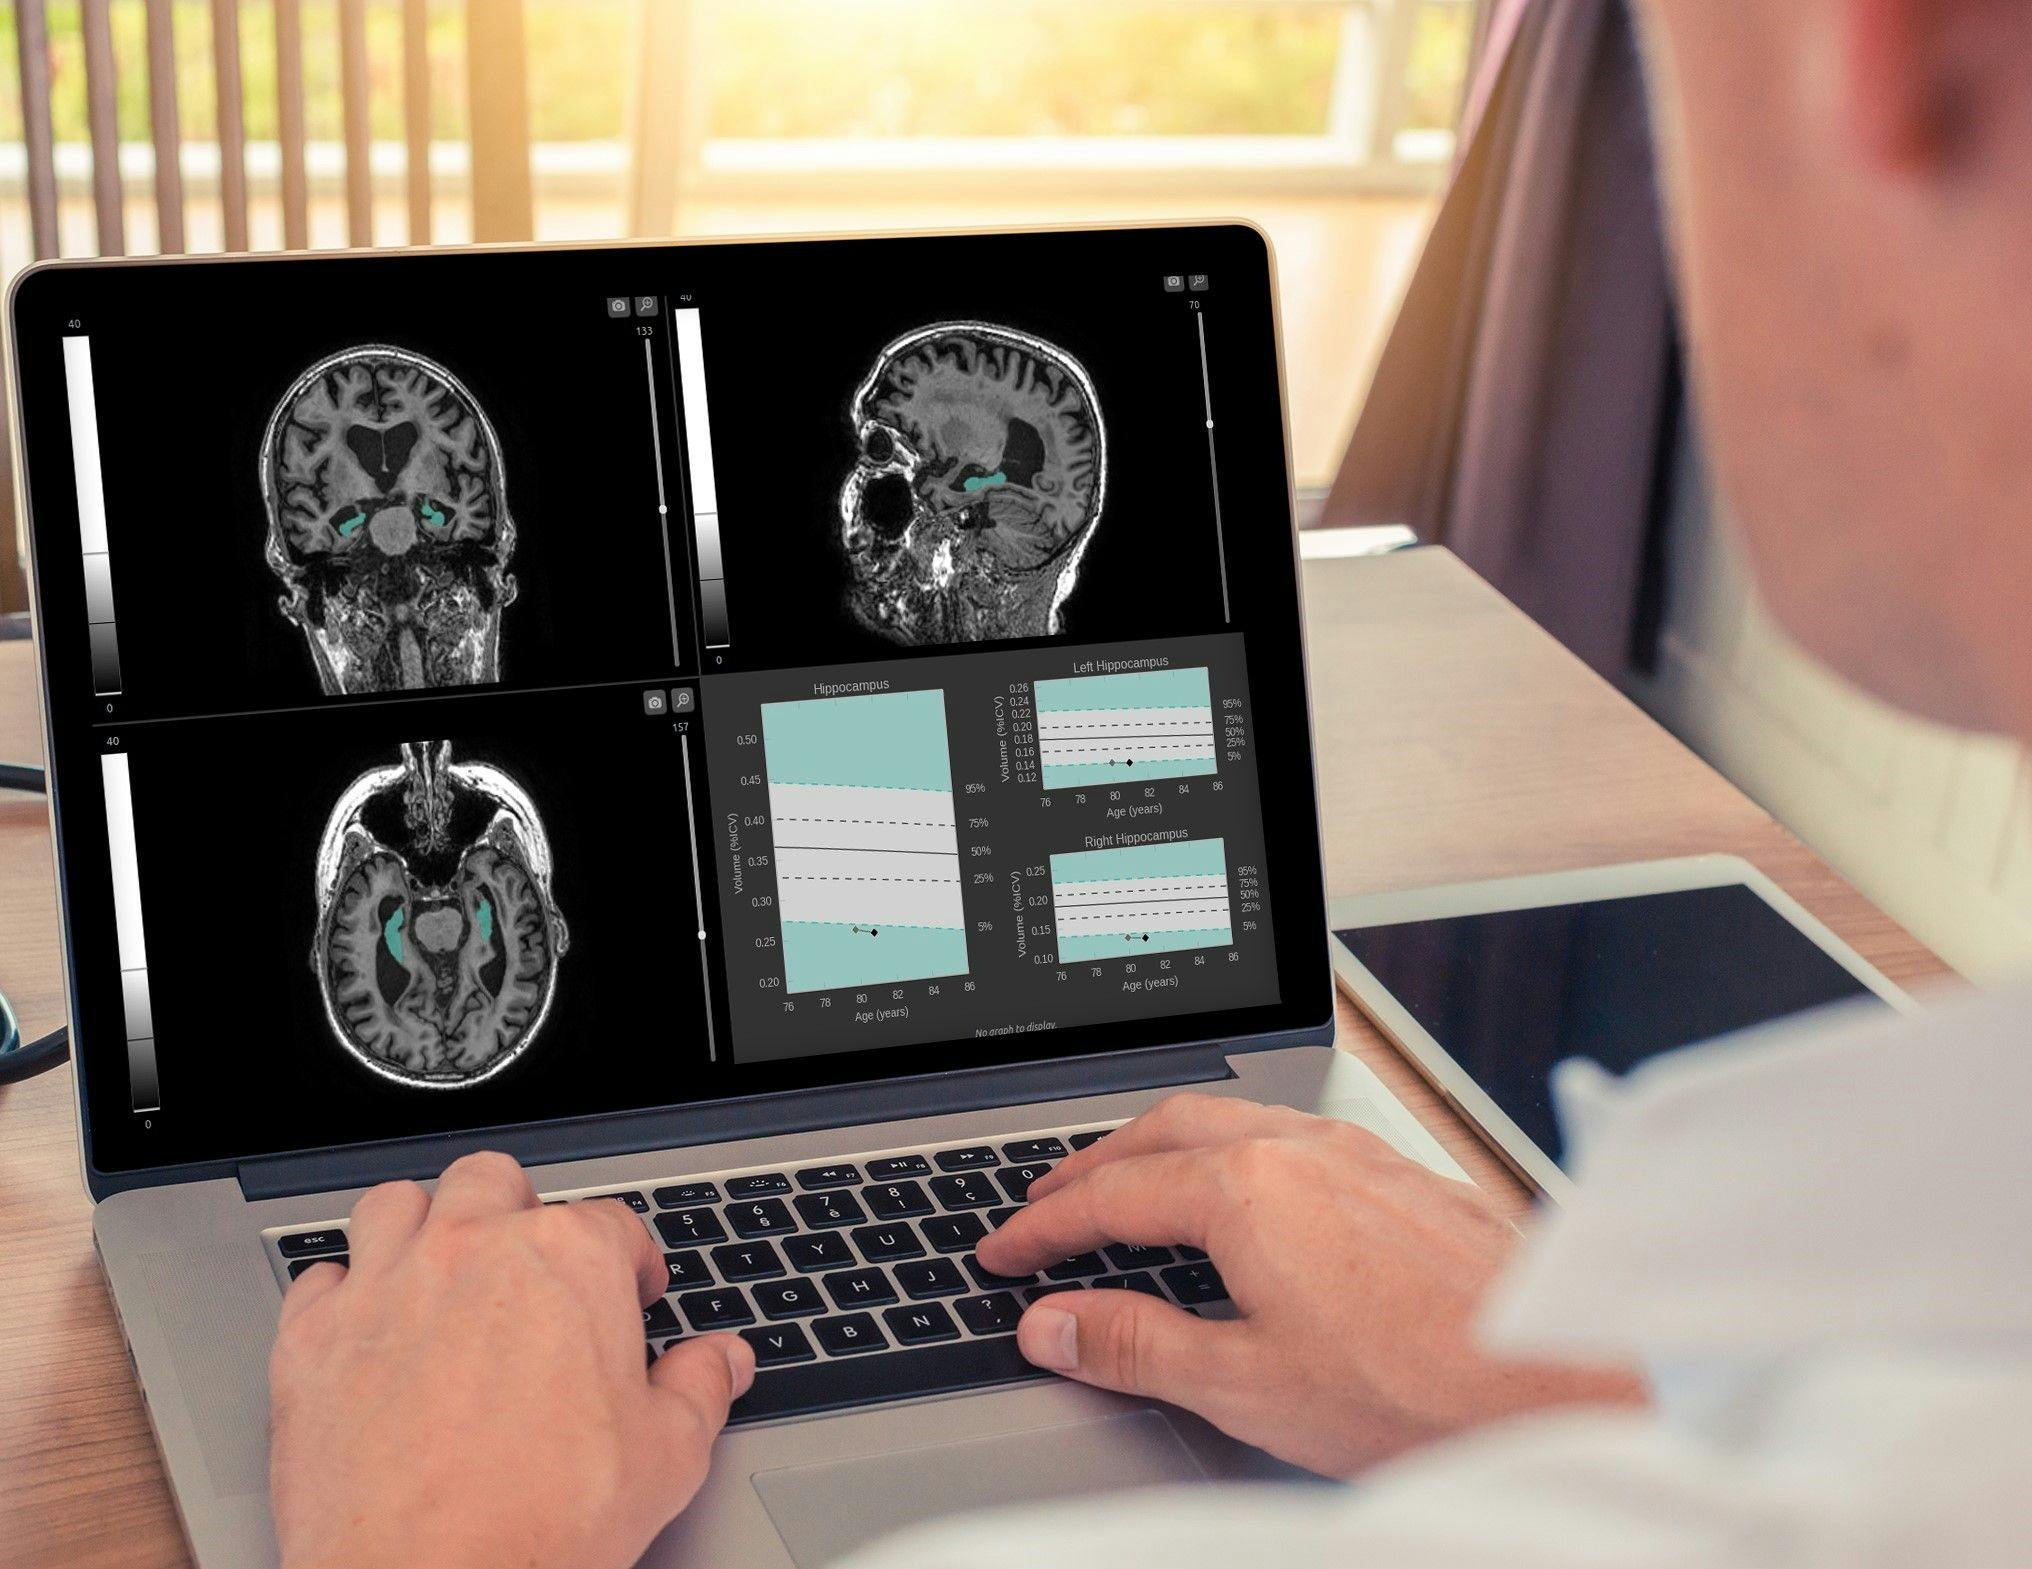 Qynapse Secures FDA Clearance for Neurodegenerative Disease Imaging Software